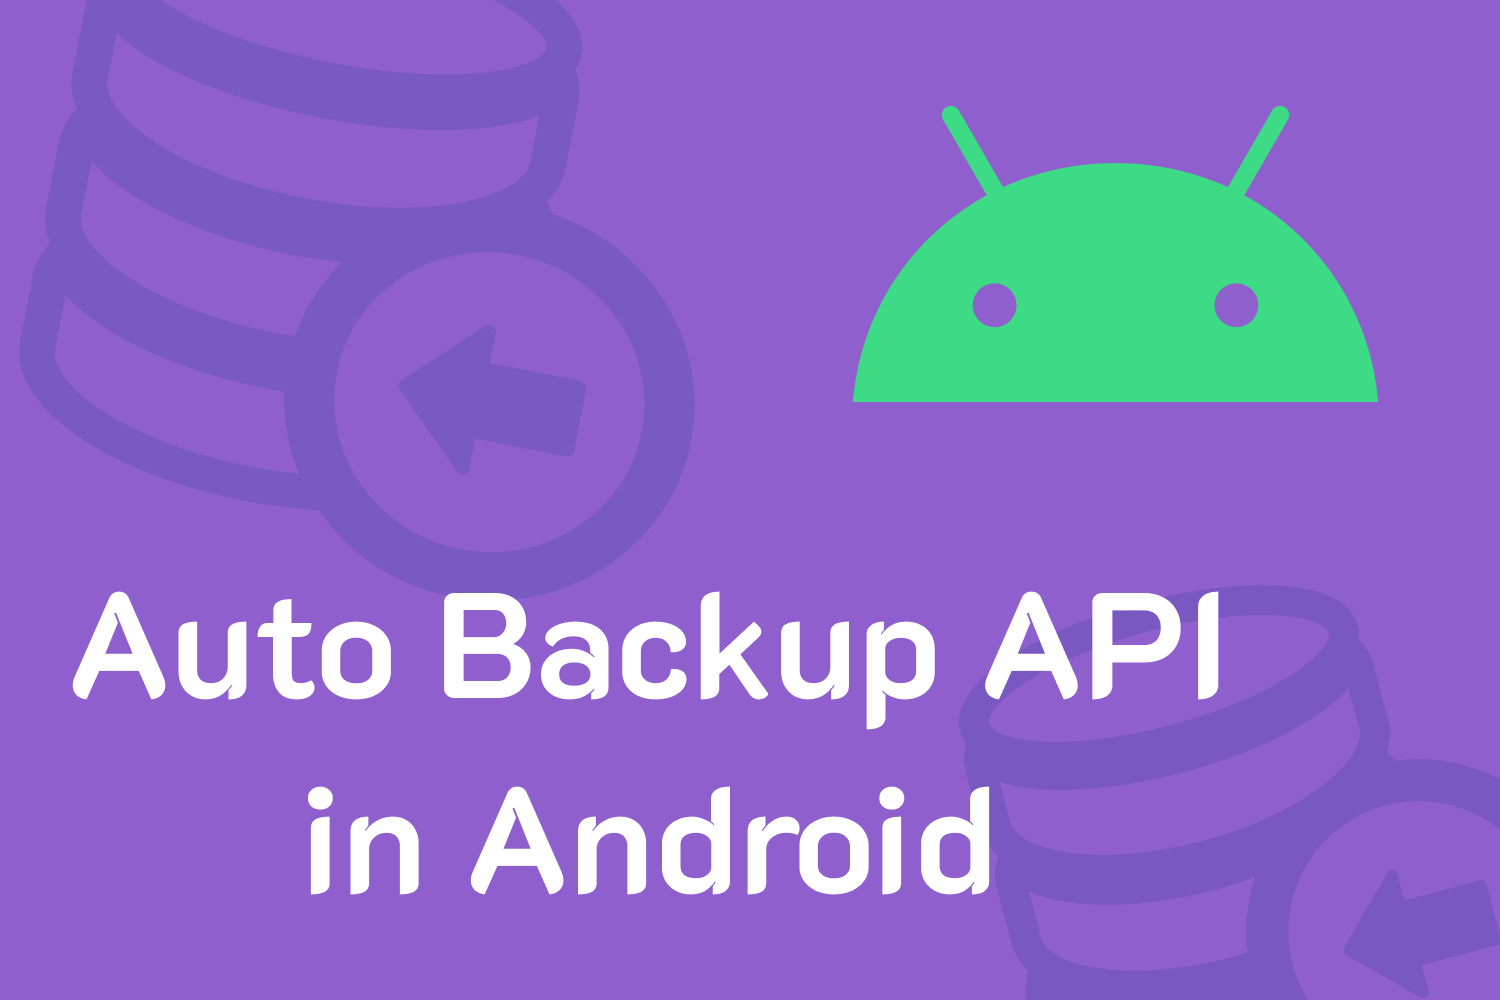 Auto Backup API in Android